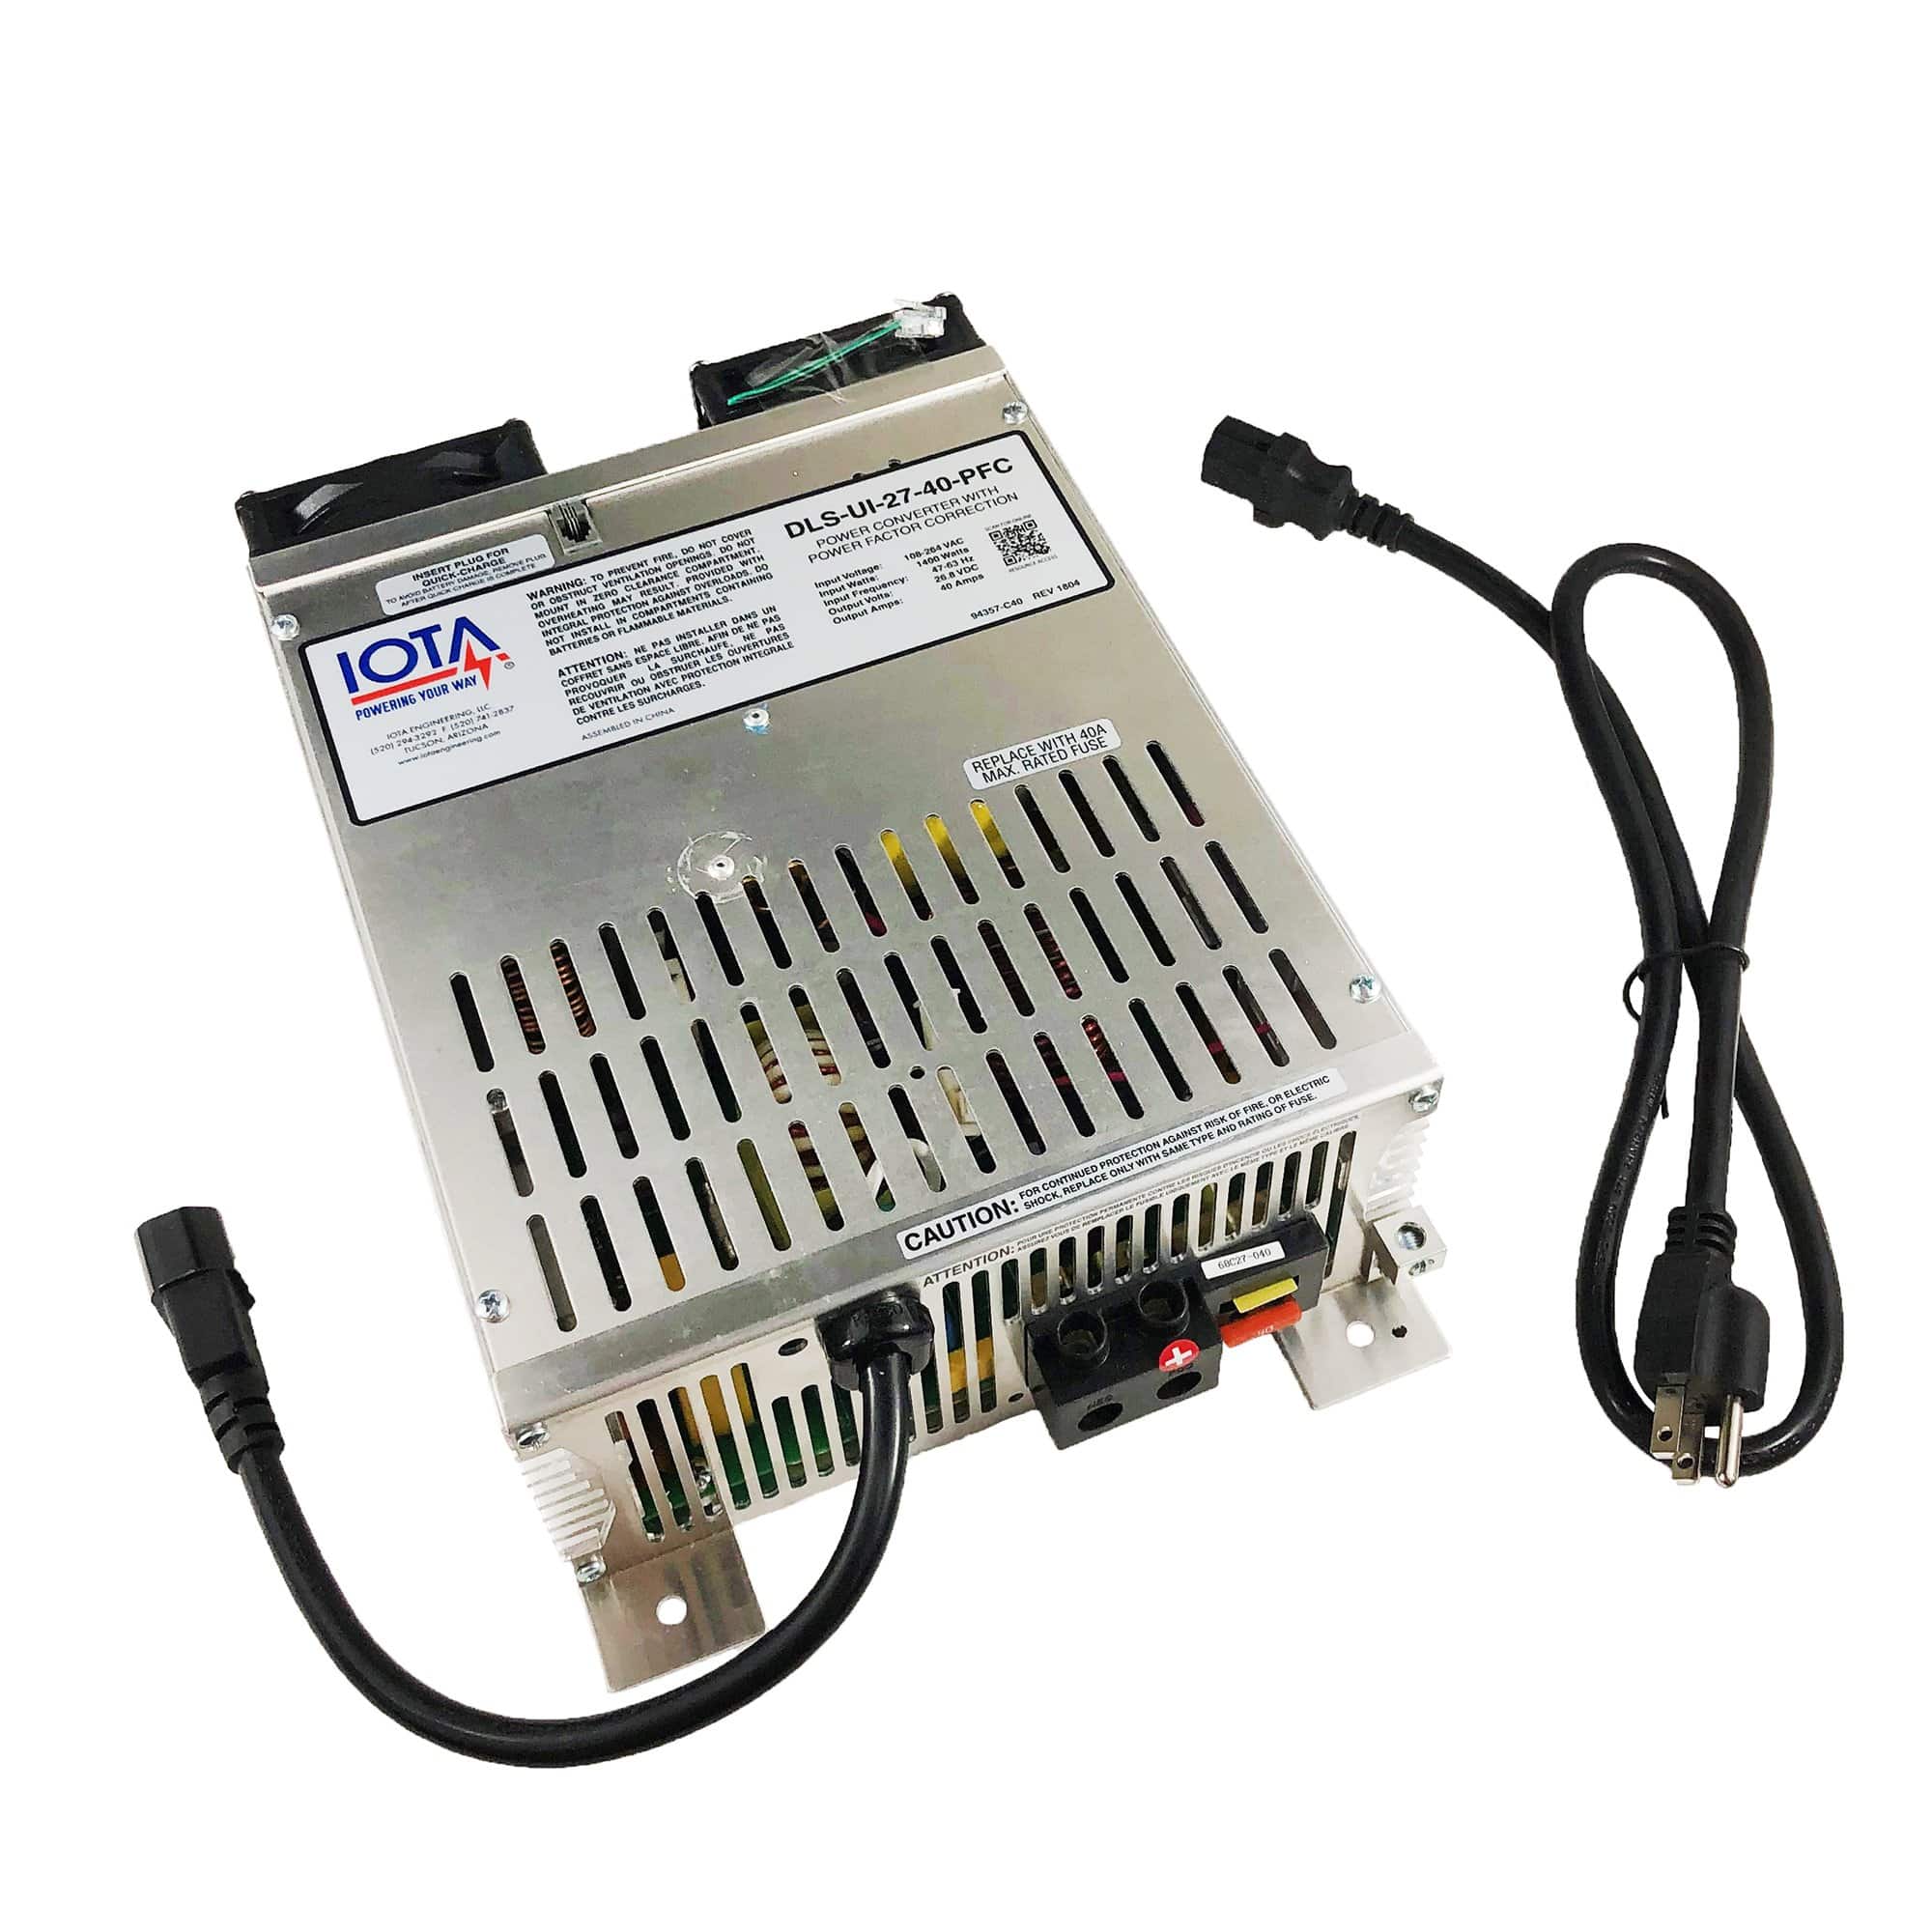 Iota DLS-UI-27-40 120-240 Volt AC, 24 DC Output, 40 Amp Universal Input Power Converter with Battery Charger